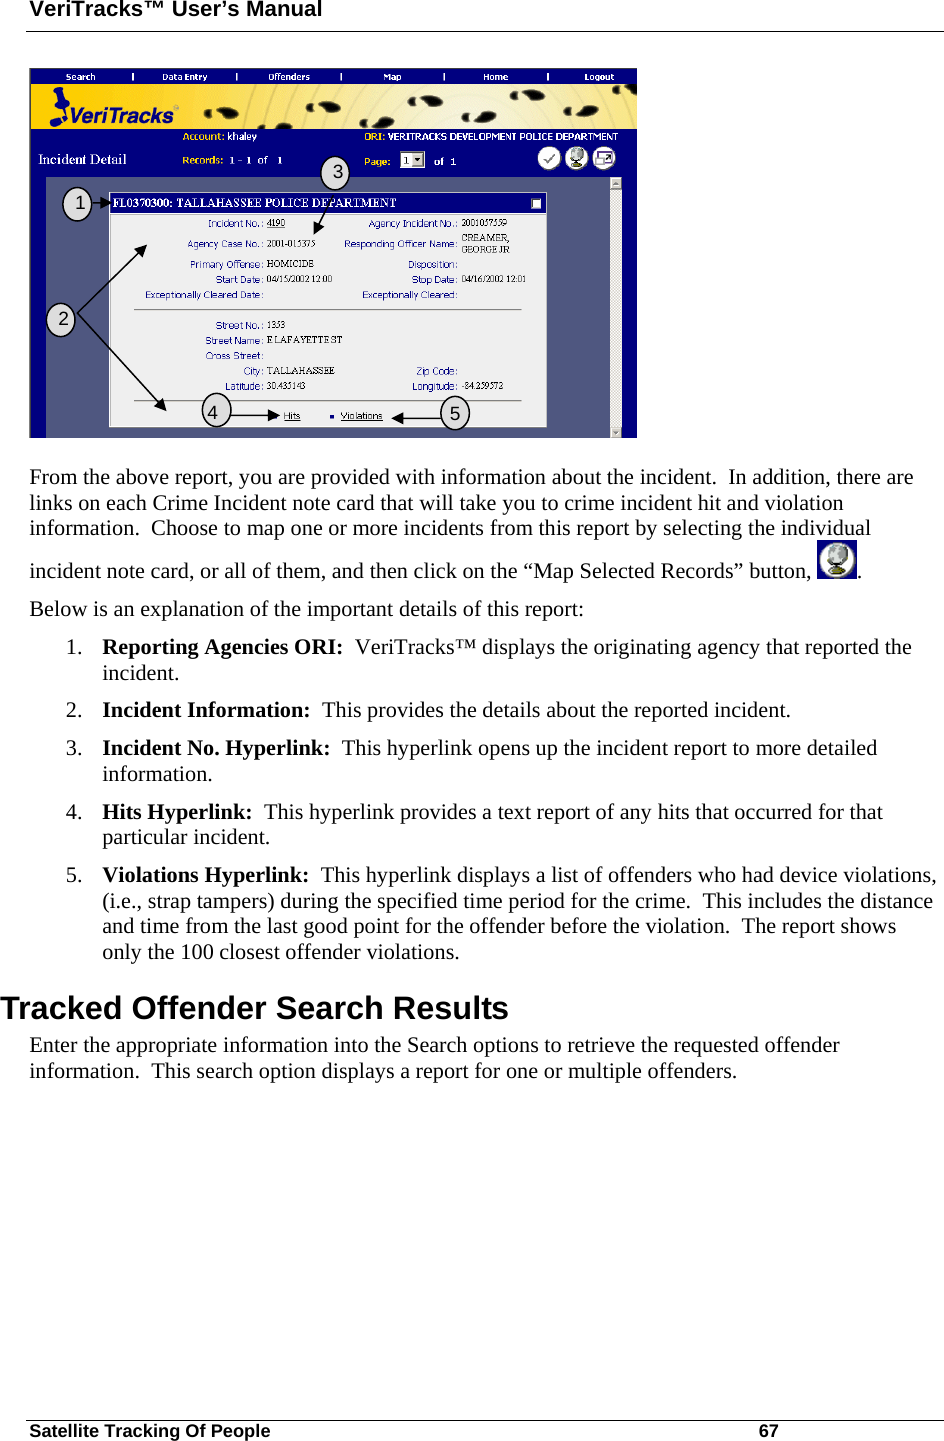 VeriTracks™ User’s Manual Satellite Tracking Of People       67  From the above report, you are provided with information about the incident.  In addition, there are links on each Crime Incident note card that will take you to crime incident hit and violation information.  Choose to map one or more incidents from this report by selecting the individual incident note card, or all of them, and then click on the “Map Selected Records” button,  . Below is an explanation of the important details of this report: 1. Reporting Agencies ORI:  VeriTracks™ displays the originating agency that reported the incident. 2. Incident Information:  This provides the details about the reported incident. 3. Incident No. Hyperlink:  This hyperlink opens up the incident report to more detailed information. 4. Hits Hyperlink:  This hyperlink provides a text report of any hits that occurred for that particular incident. 5. Violations Hyperlink:  This hyperlink displays a list of offenders who had device violations, (i.e., strap tampers) during the specified time period for the crime.  This includes the distance and time from the last good point for the offender before the violation.  The report shows only the 100 closest offender violations.  Tracked Offender Search Results Enter the appropriate information into the Search options to retrieve the requested offender information.  This search option displays a report for one or multiple offenders.   2   3  5  1   4